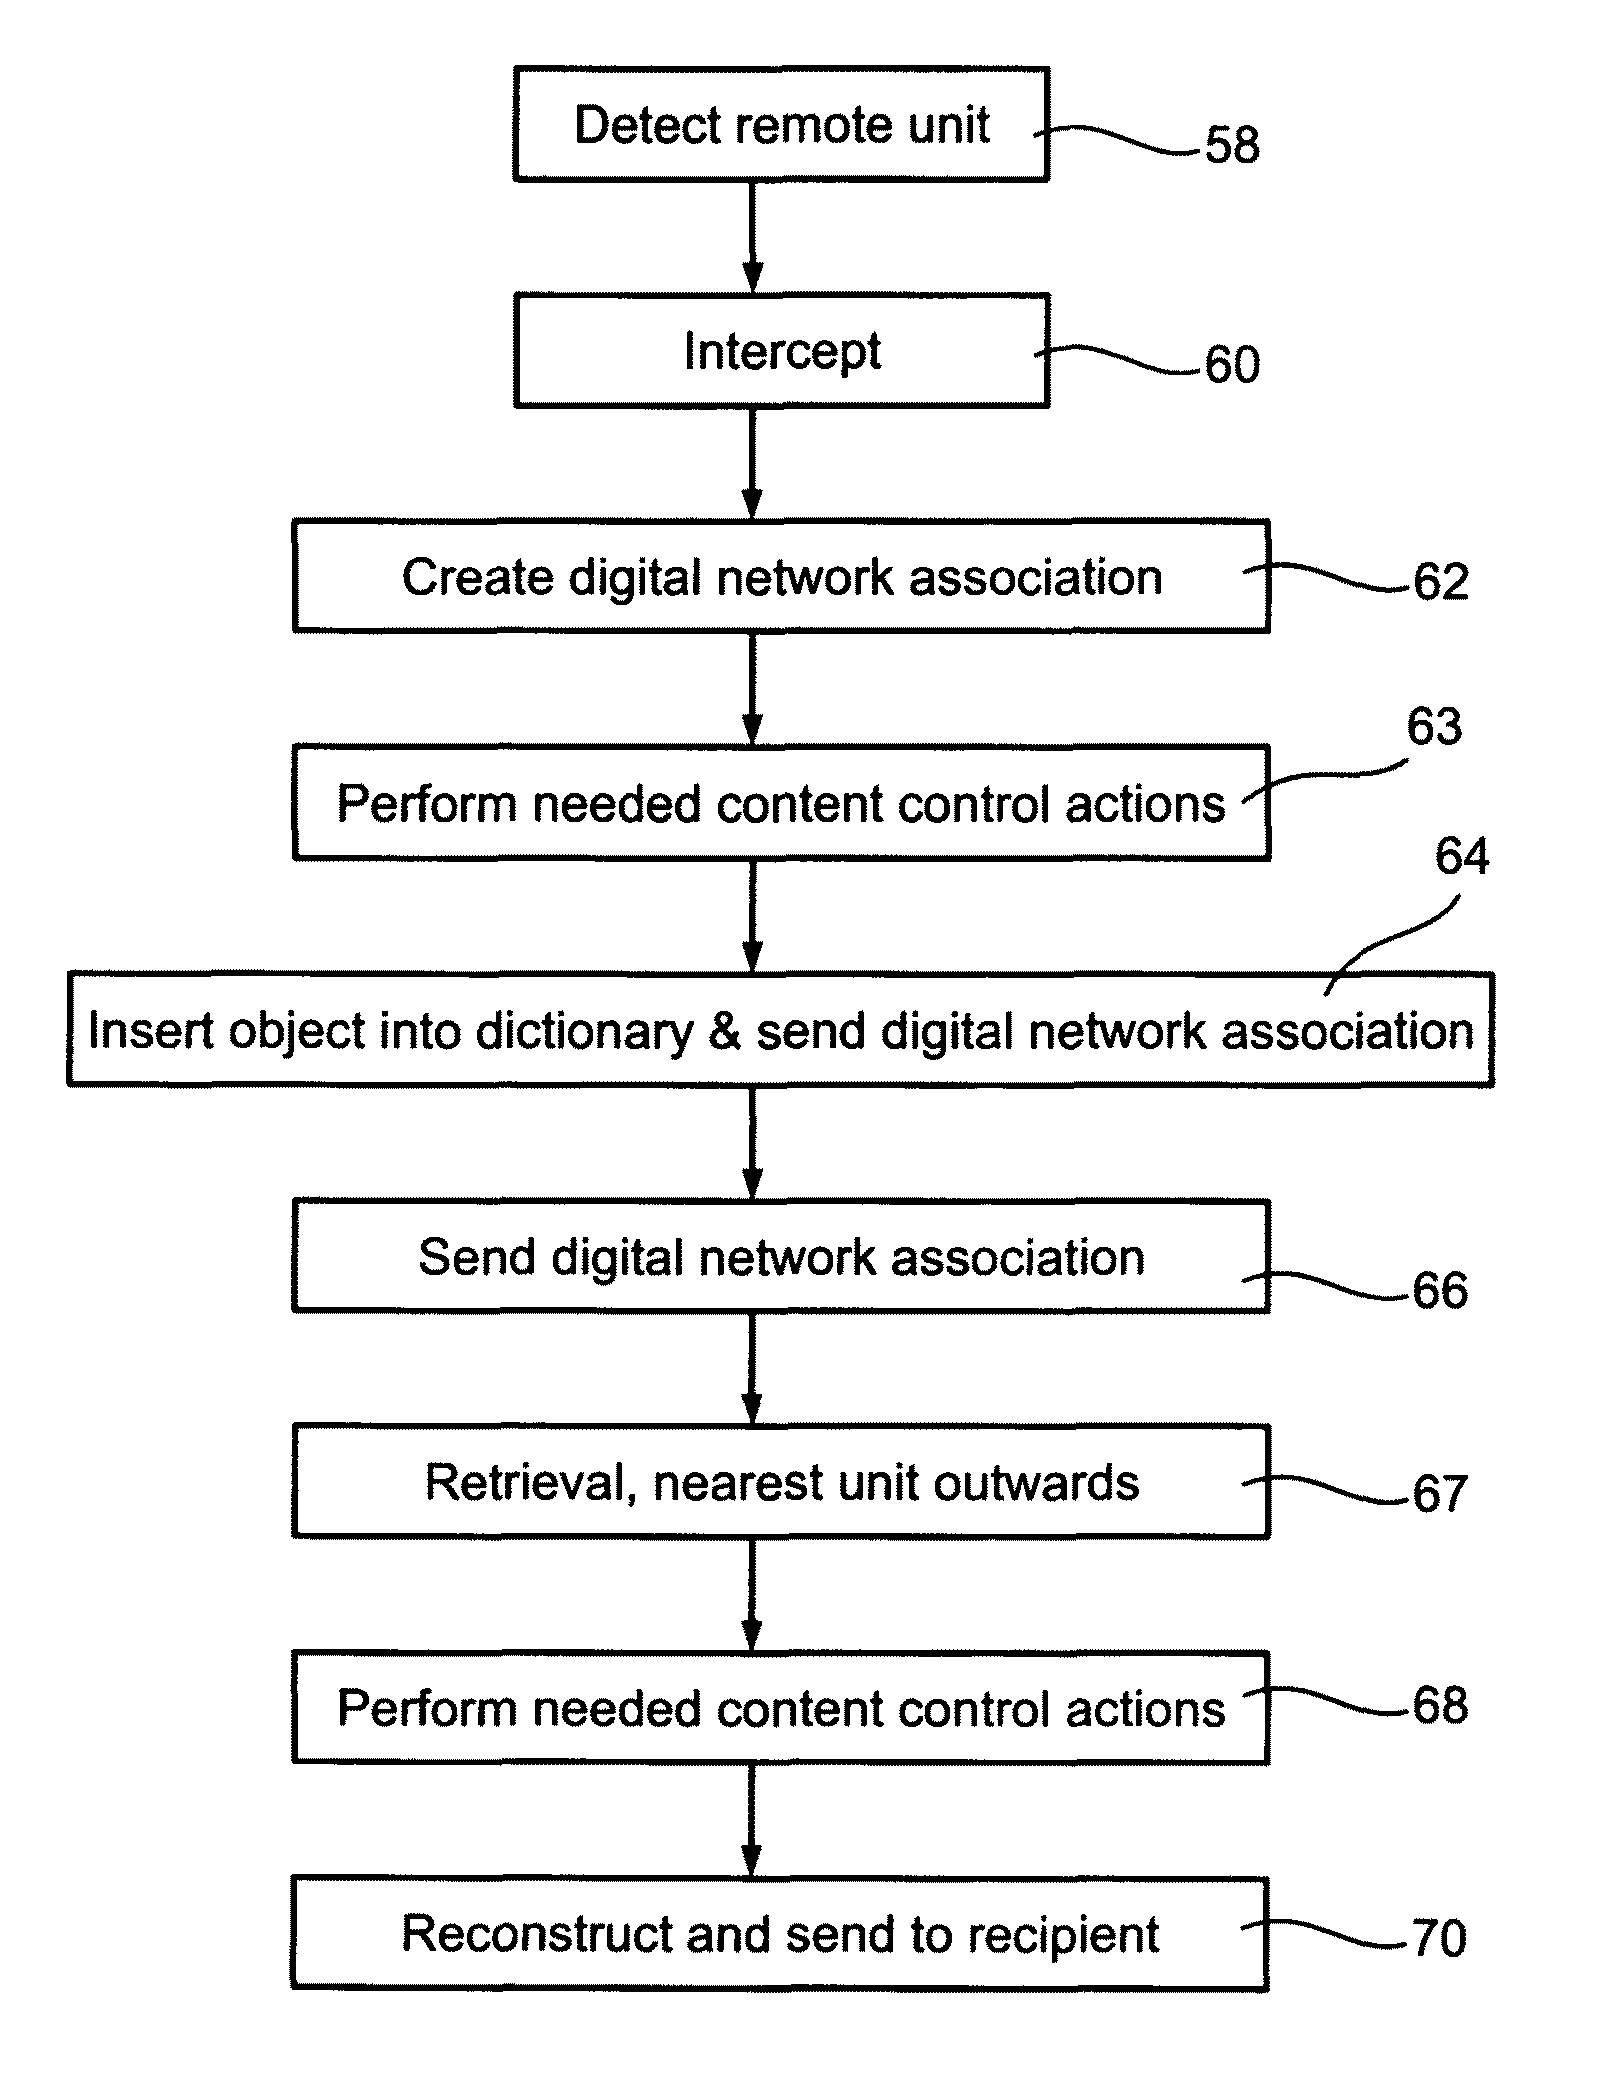 Bidirectional data transfer optimization and content control for networks